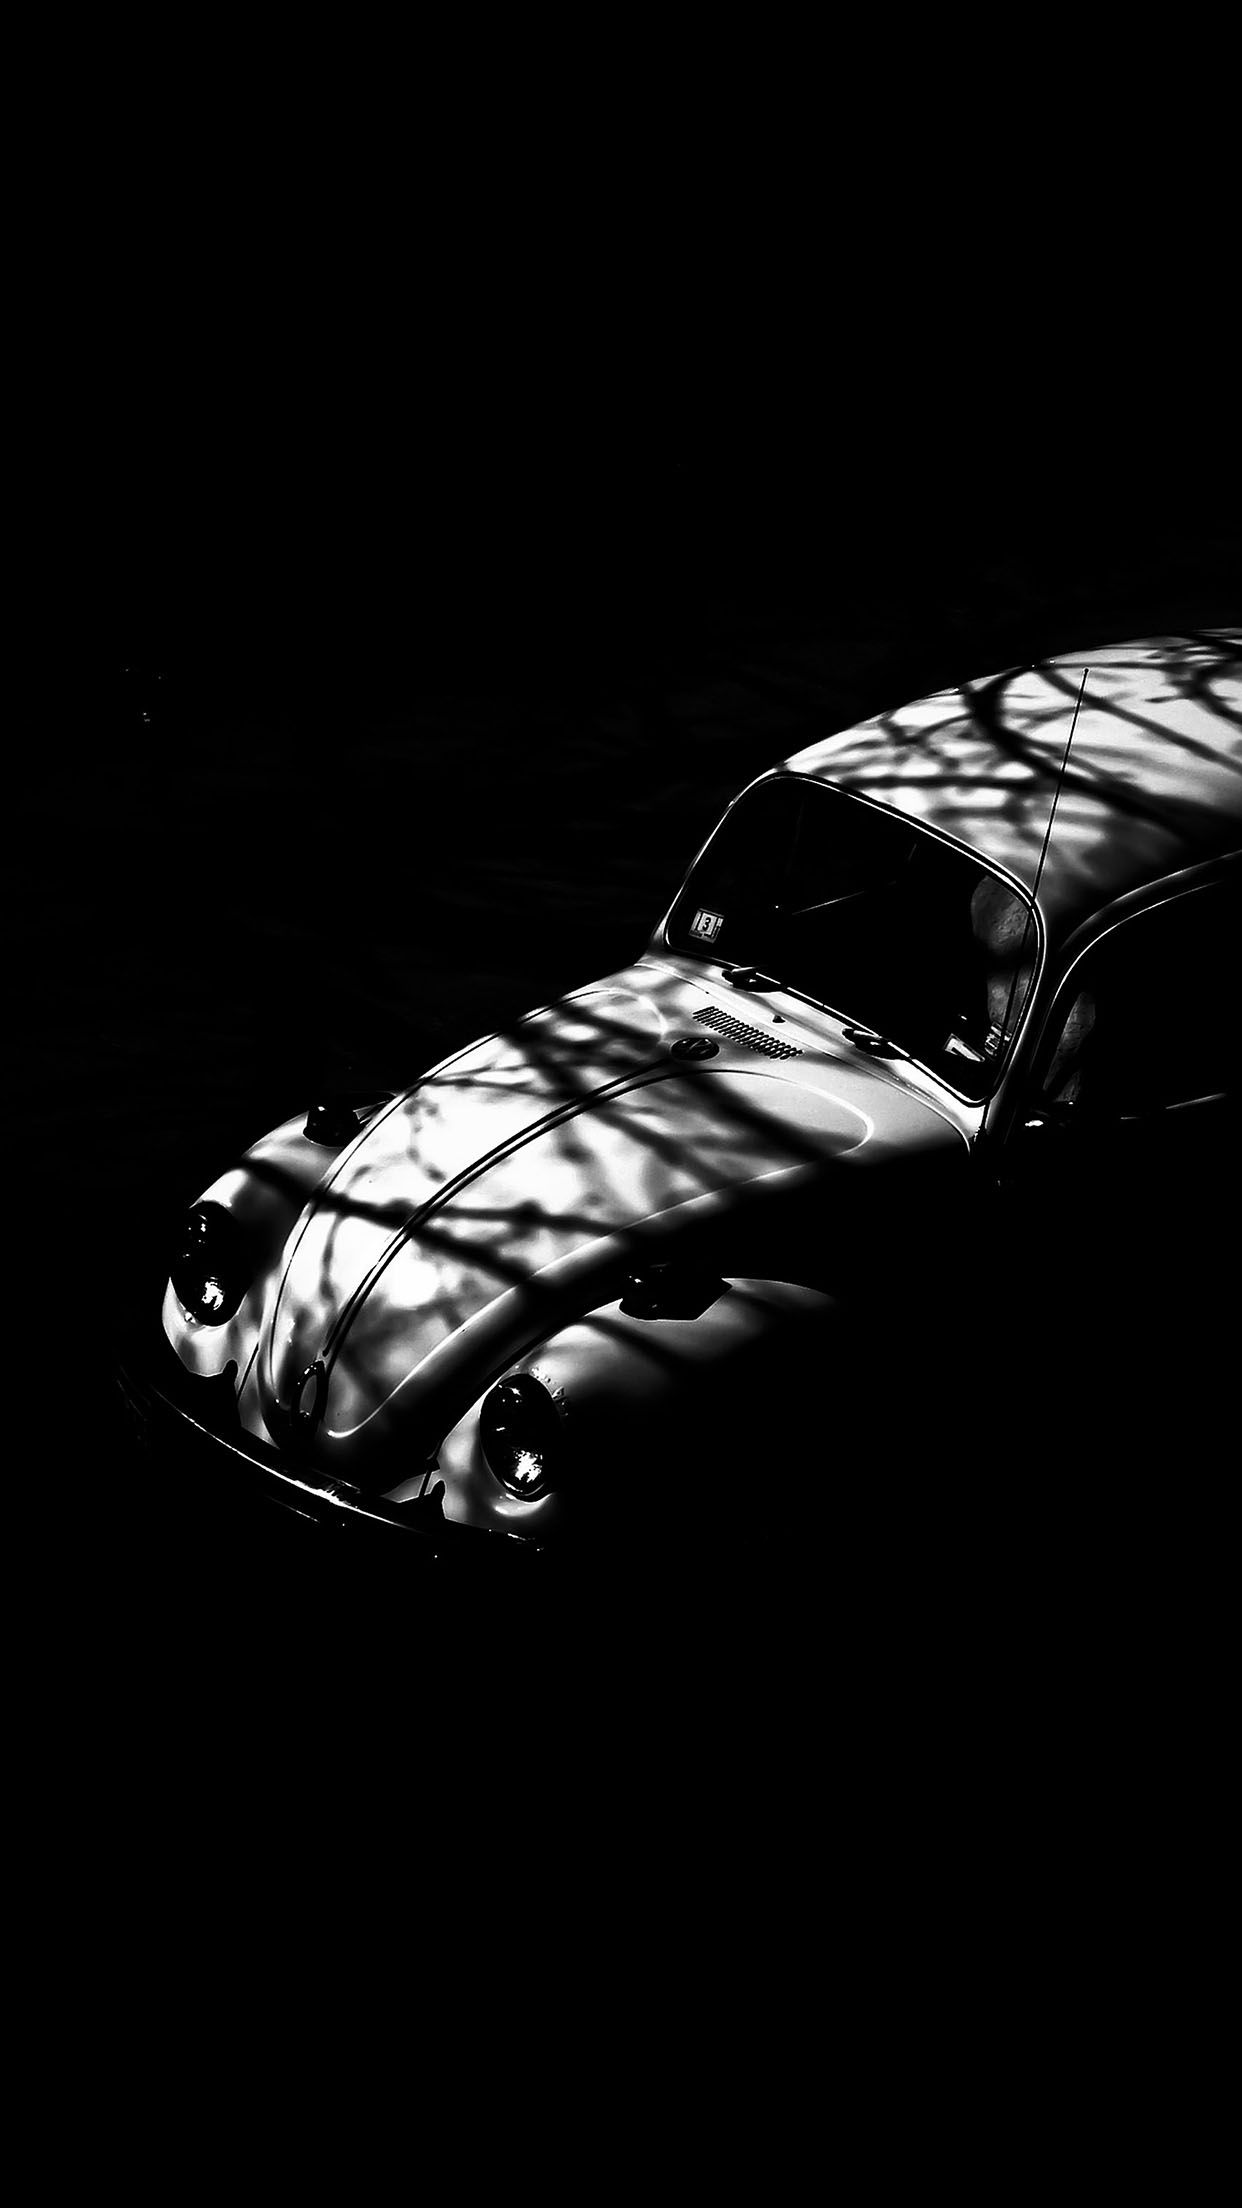 Old Volkswagen Beetle Shadows Black Android Wallpaper free download